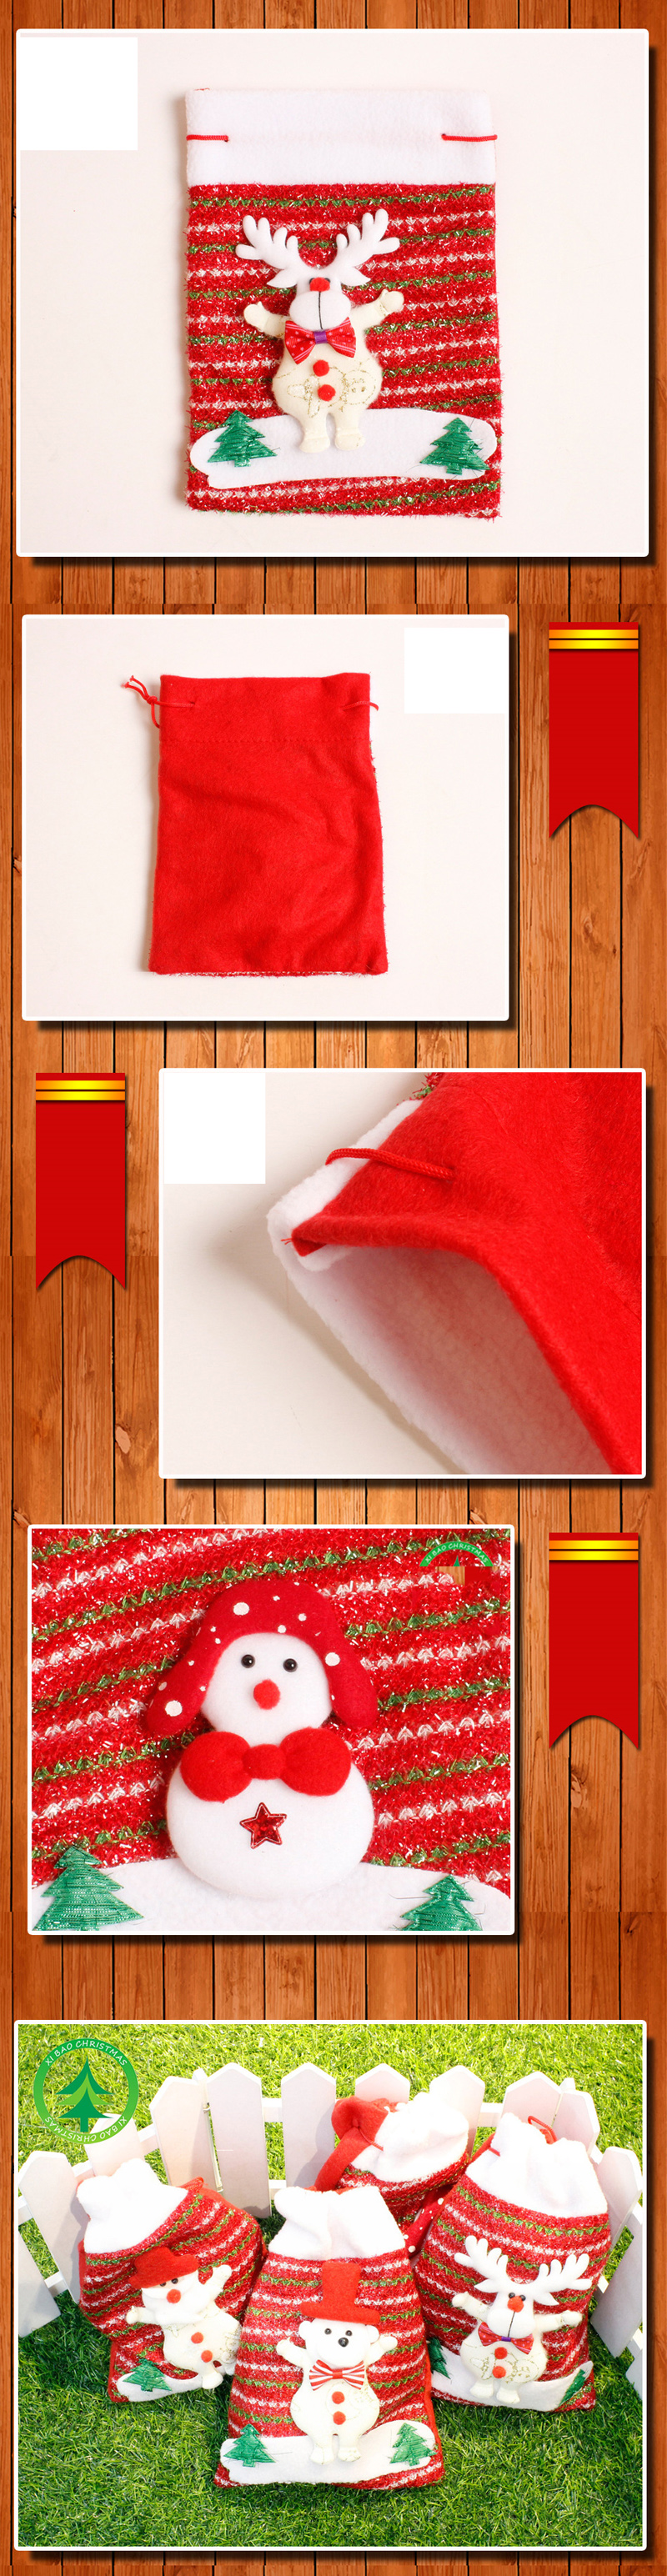 Christmas-Day-Stocking-Packing-Gift-Box-Cute-Santa-Decoration-Candy-Box-Stocking-Christmas-Gift-Bags-1220287